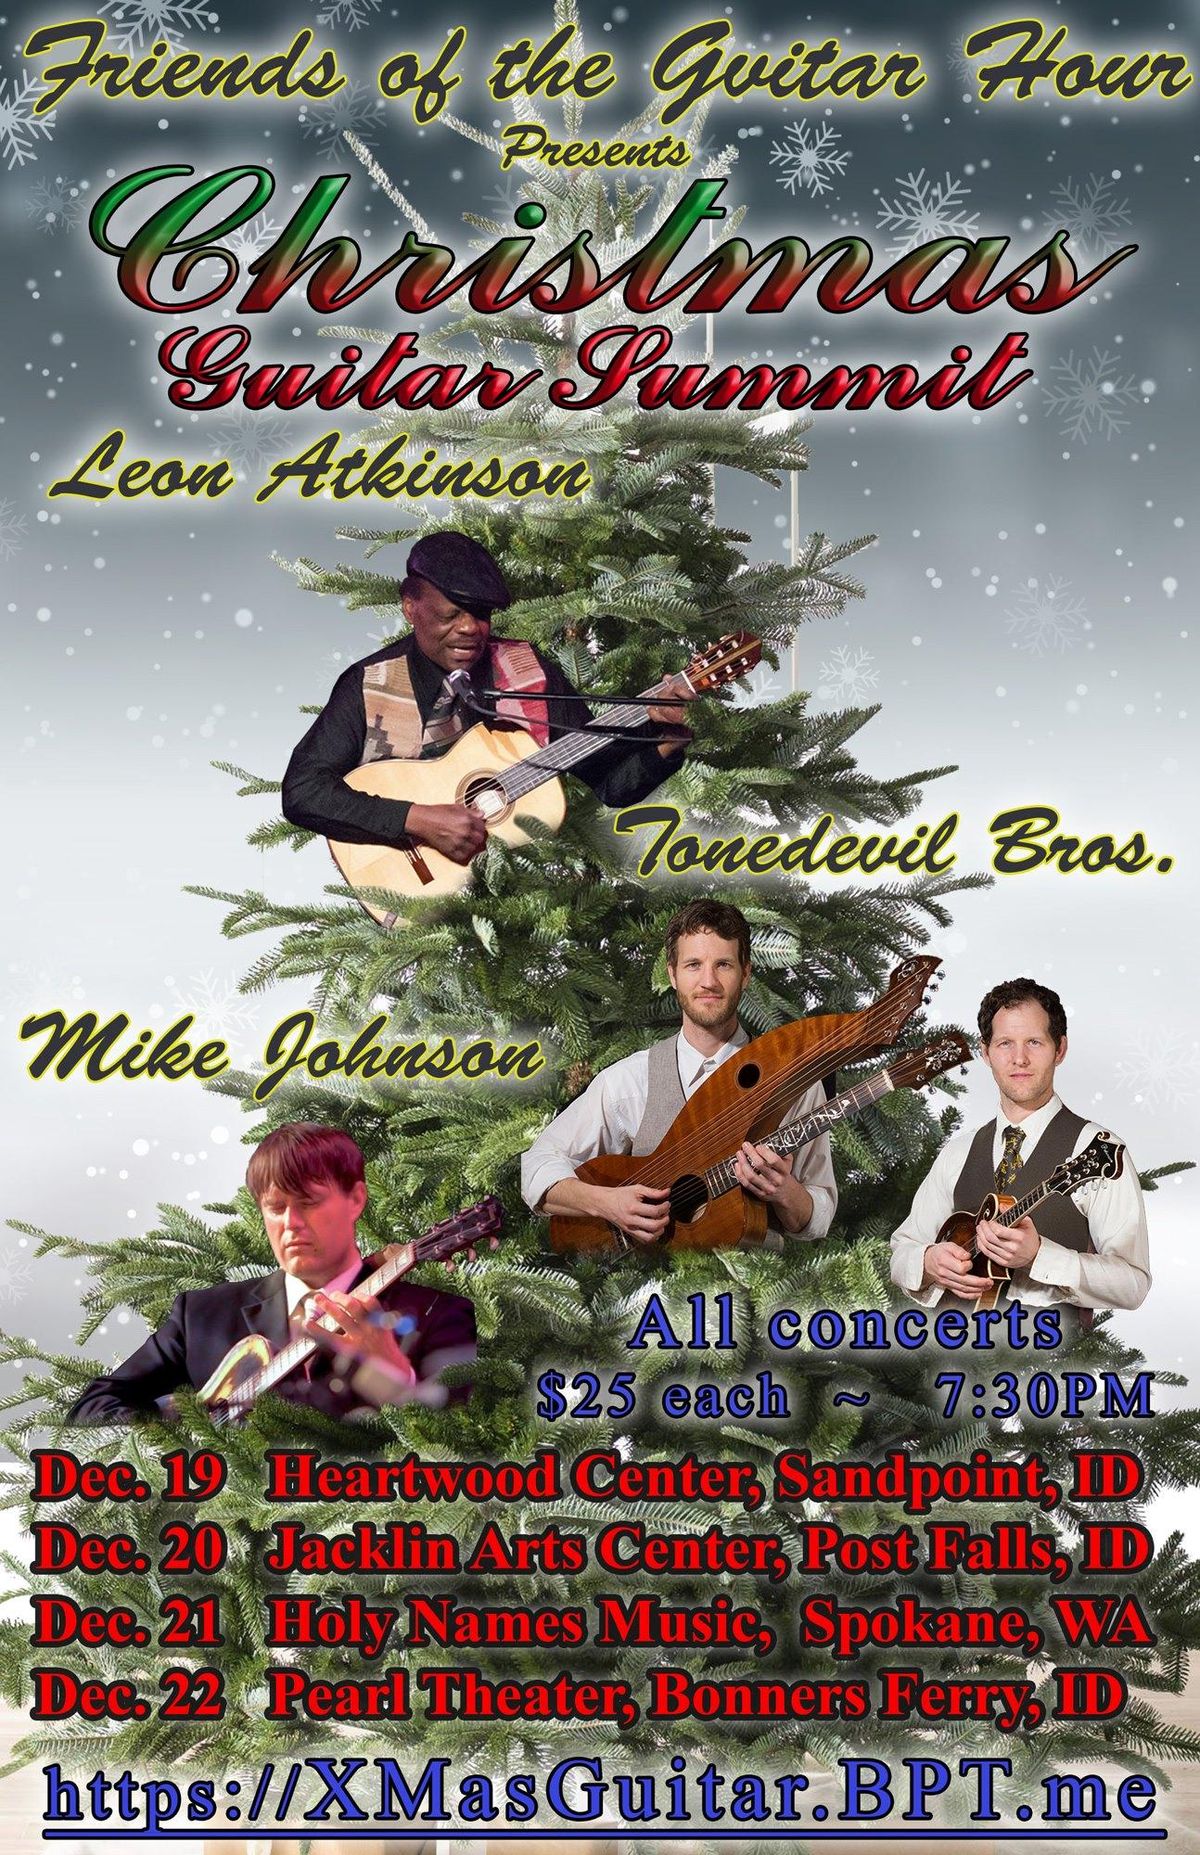 The Christmas Guitar Summit features the music of Leon Atkinson, the Tonedevil Bros. and Mike Johnson, Thursday through Sunday at various venues across the Inland Northwest. (Courtesy photo)